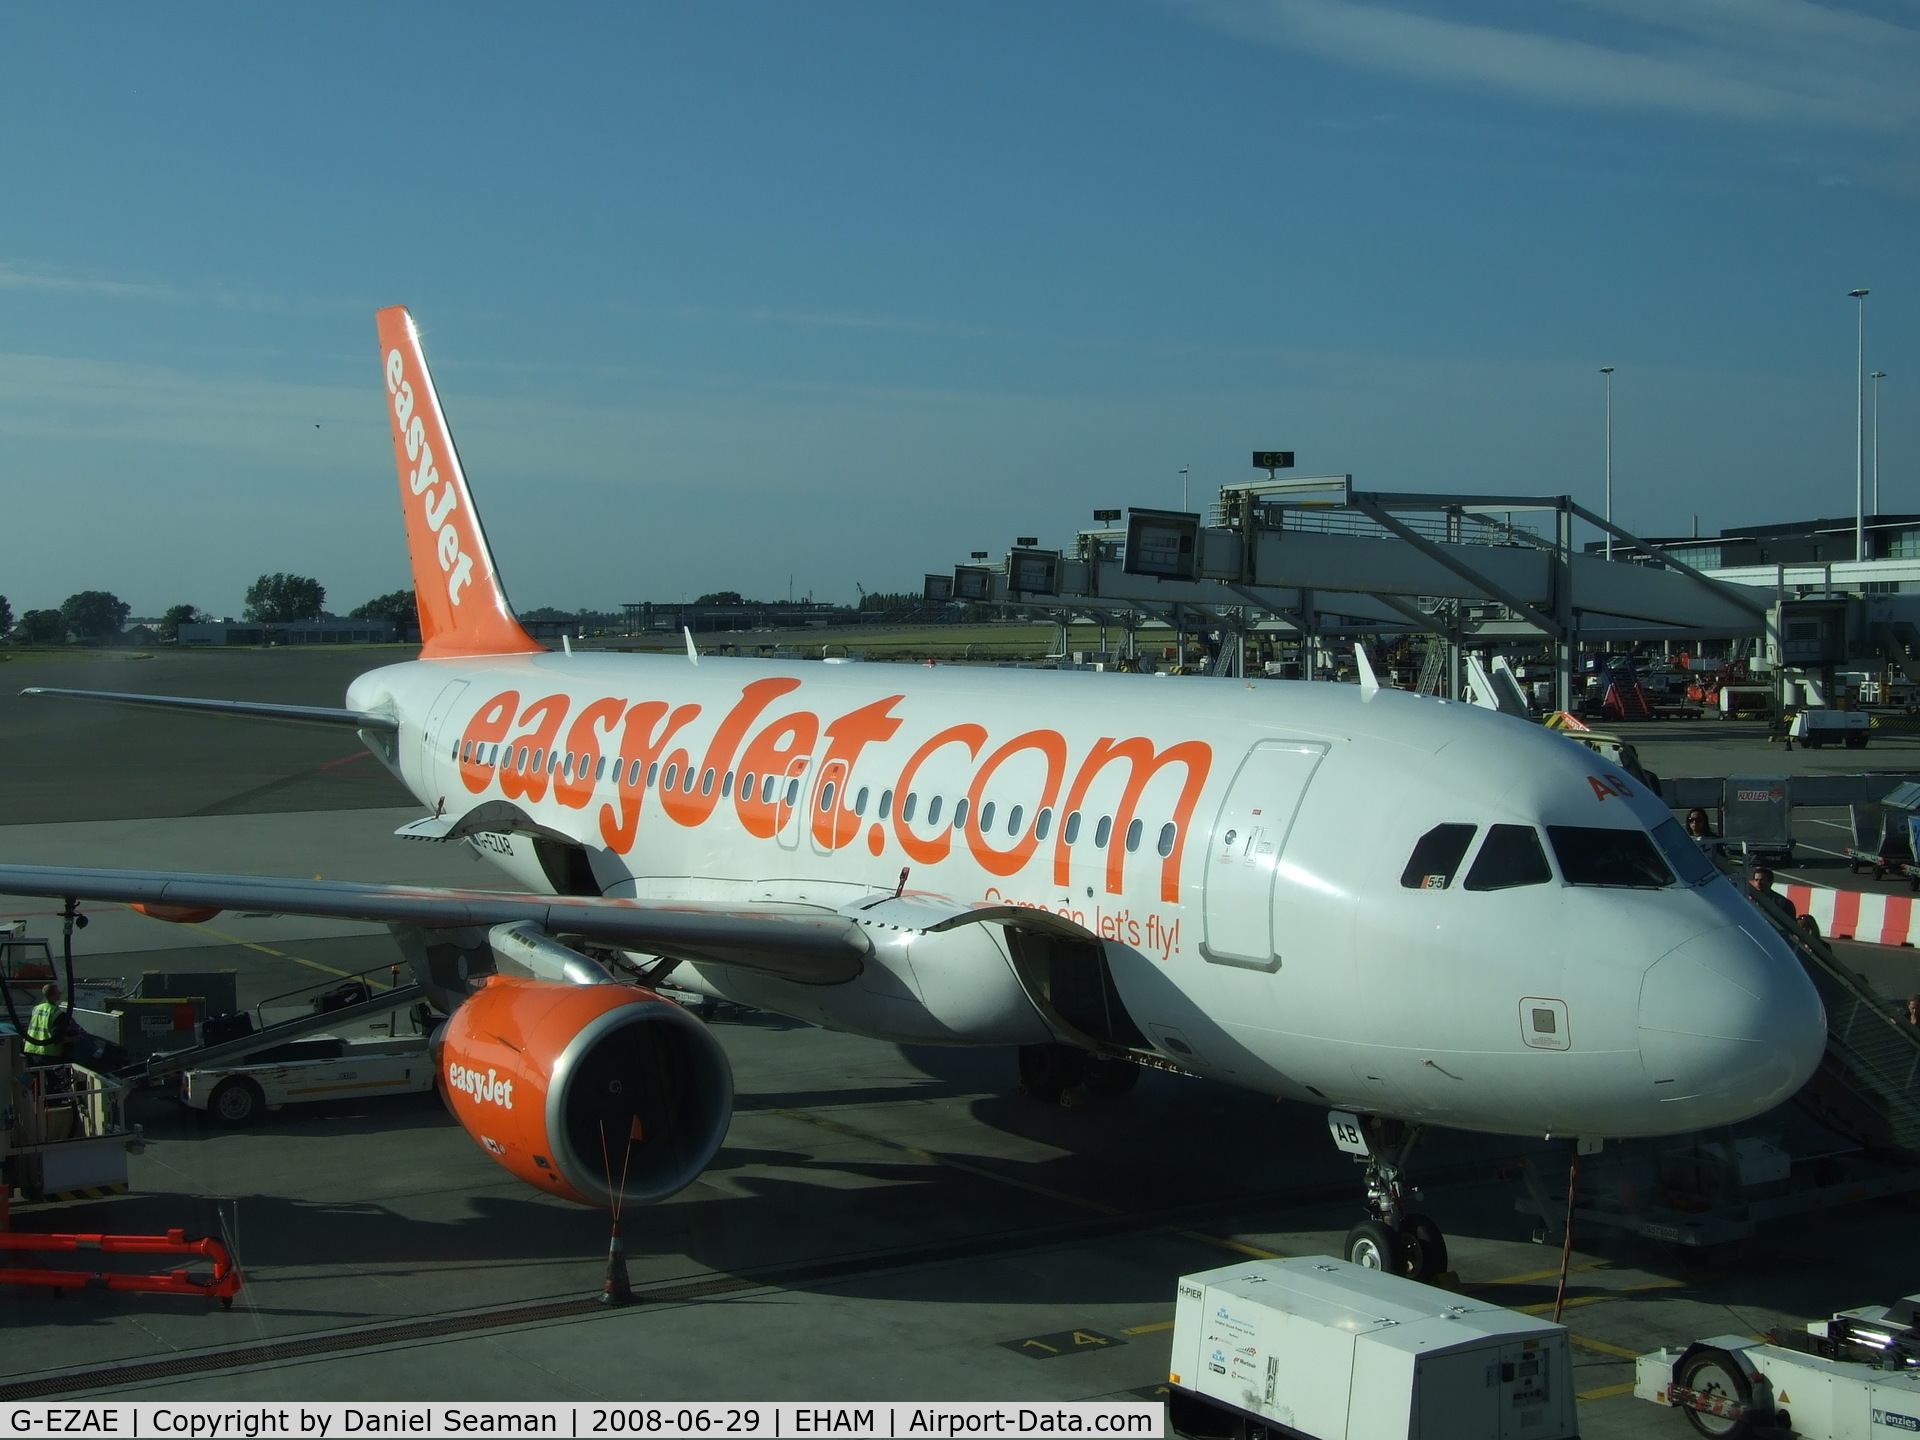 G-EZAE, 2006 Airbus A319-111 C/N 2709, just arrived from bristol with me onbourd.